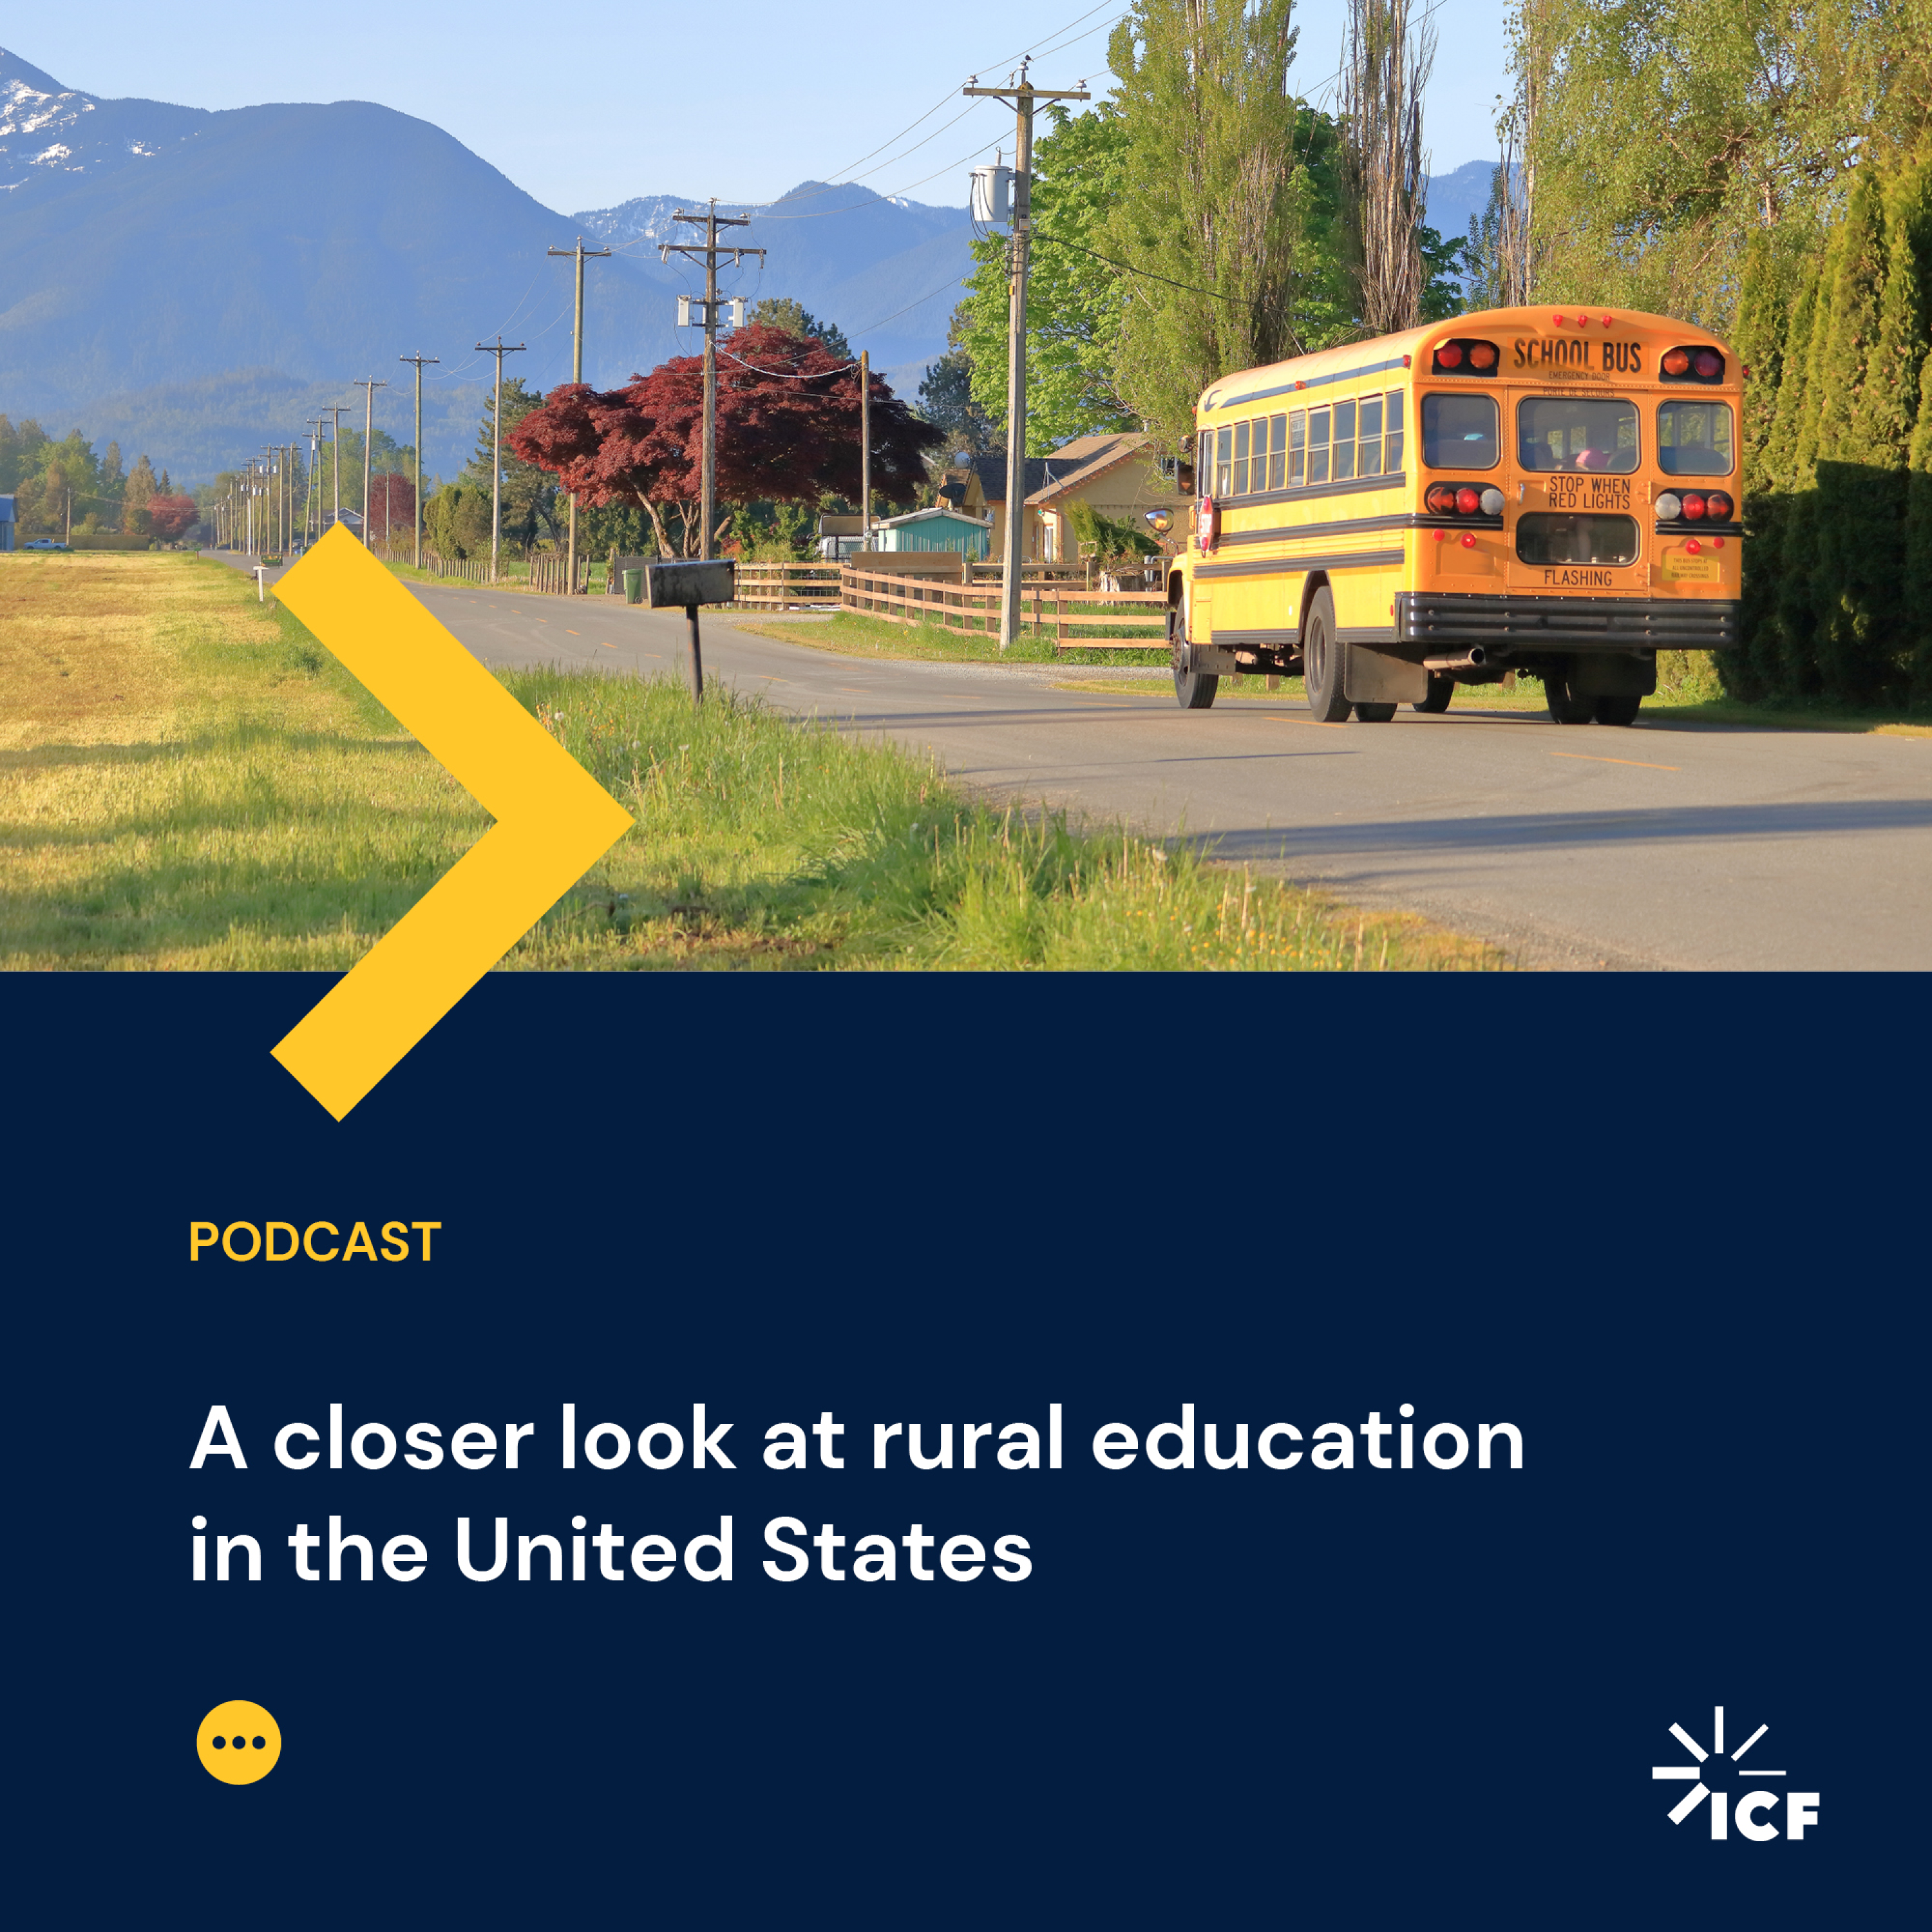 A closer look at rural education in the United States